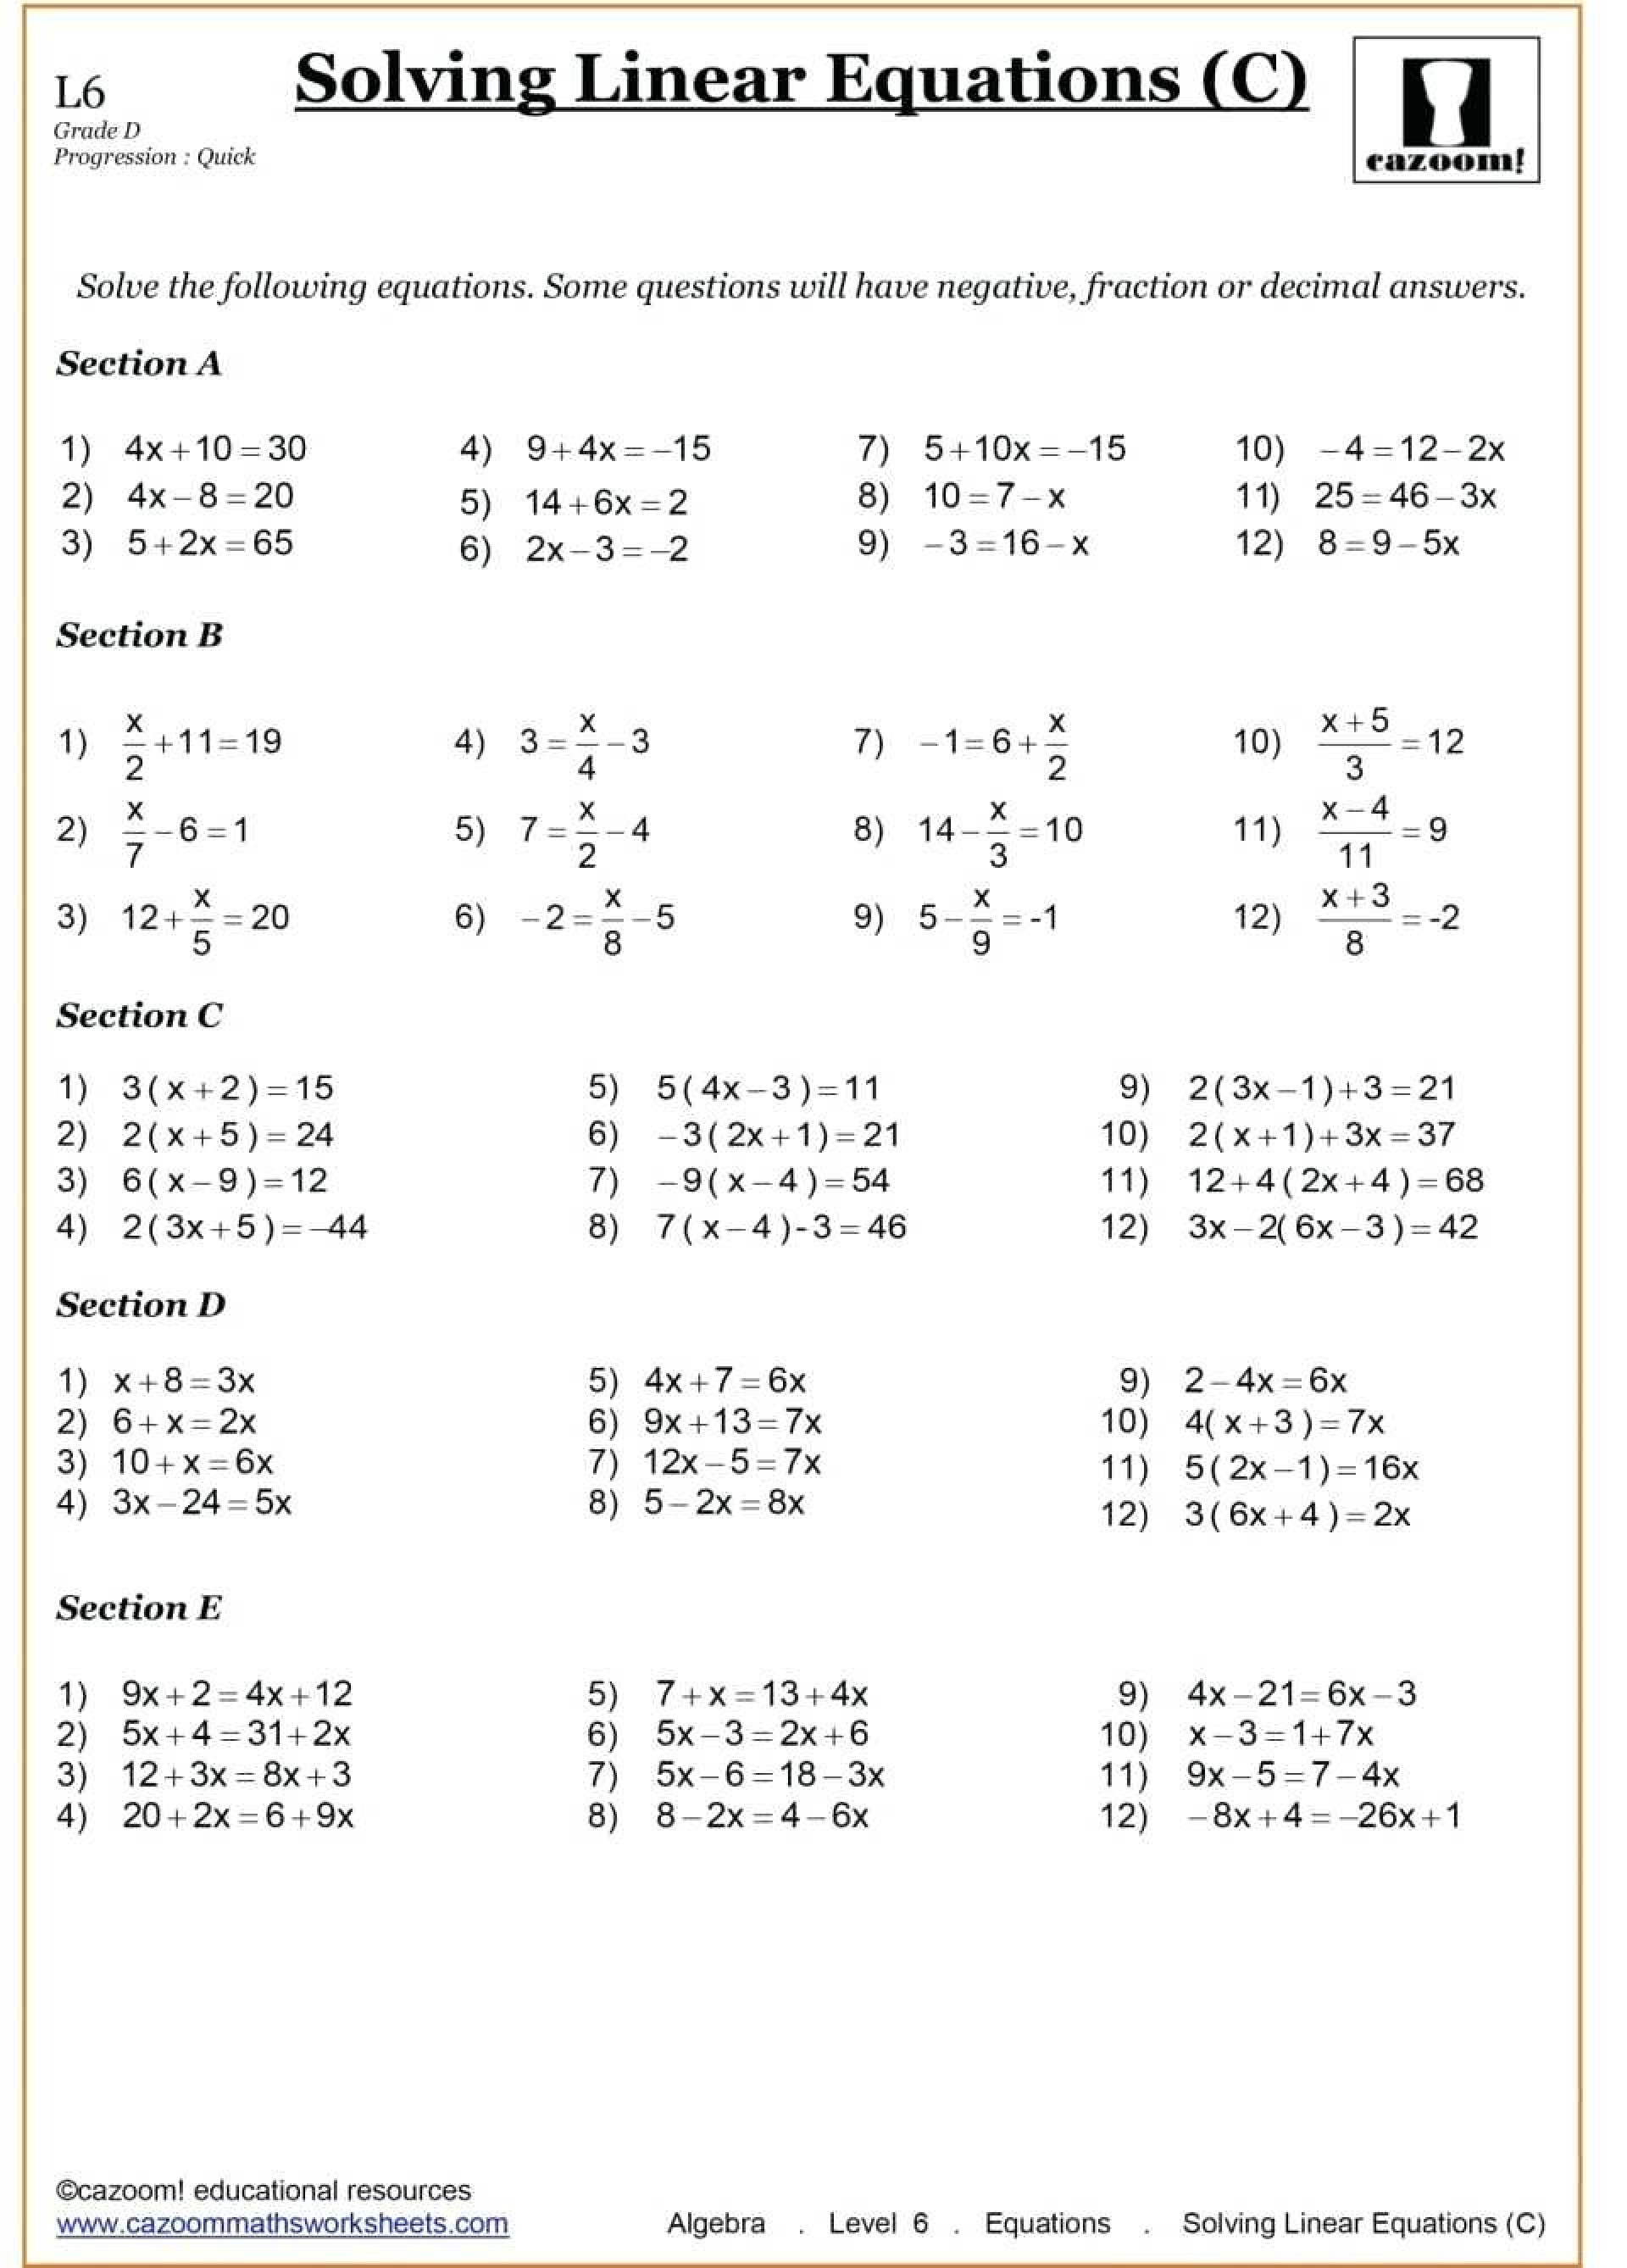 Adding And Subtracting Polynomials Worksheet